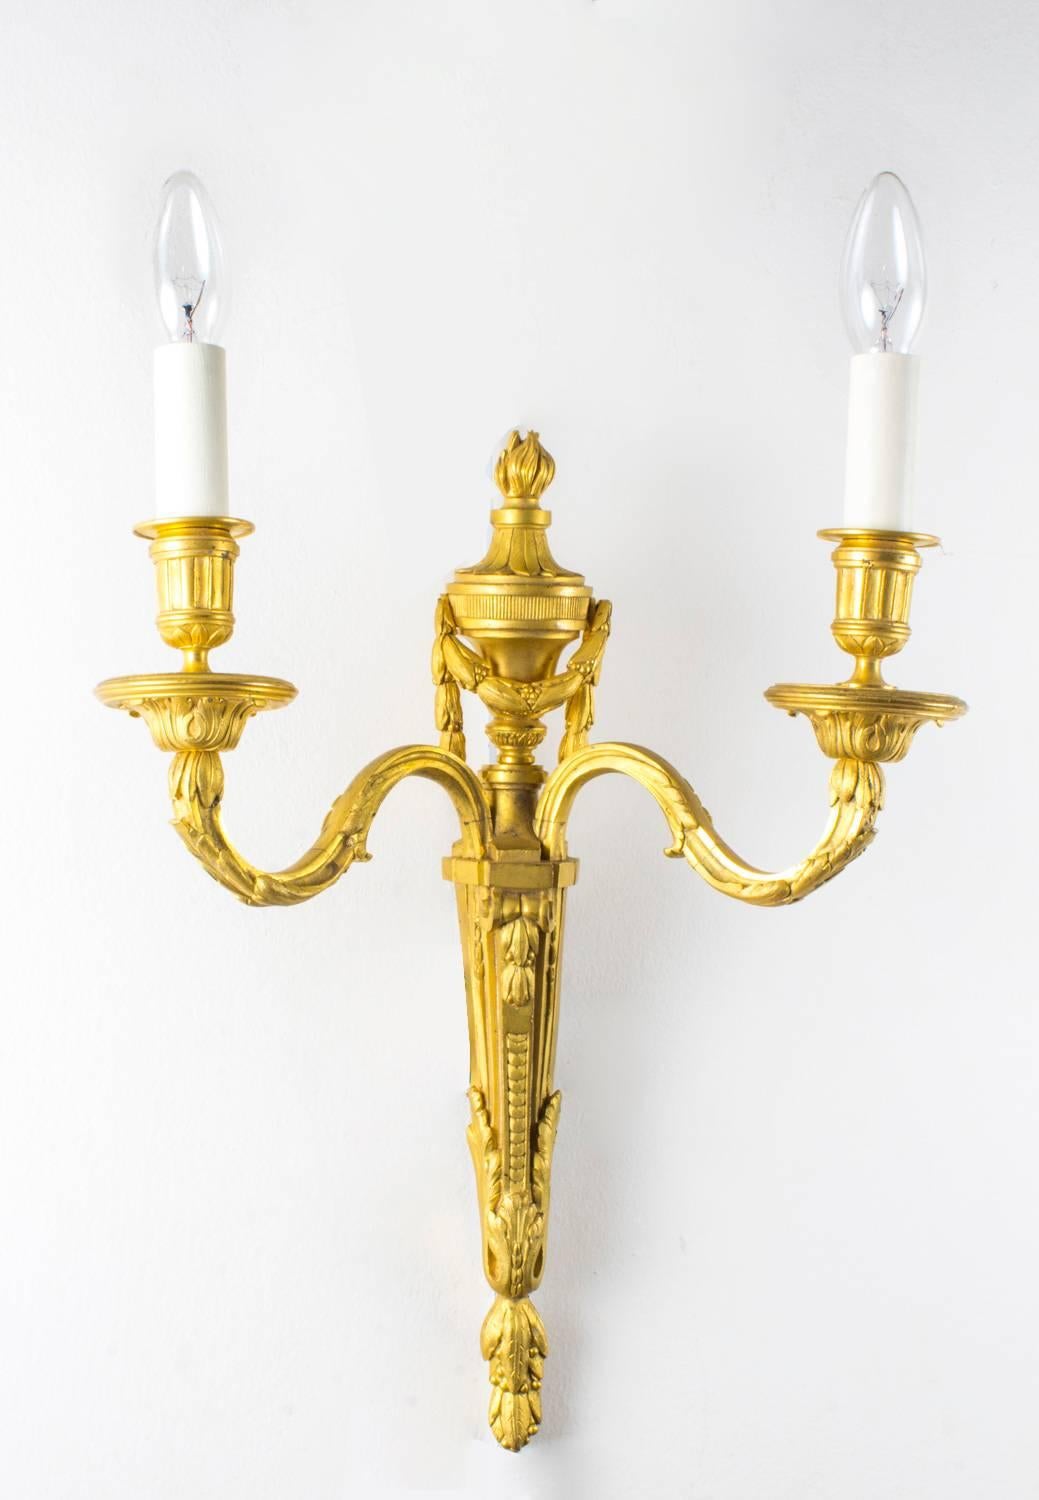 This is a stunning pair of antique gilded ormolu twin branch wall lights with flamimg torch decoration, dating from the late 19th century.

Purchased from a fabulous apartment in Hampstead, London.

There is no mistaking their unique quality and